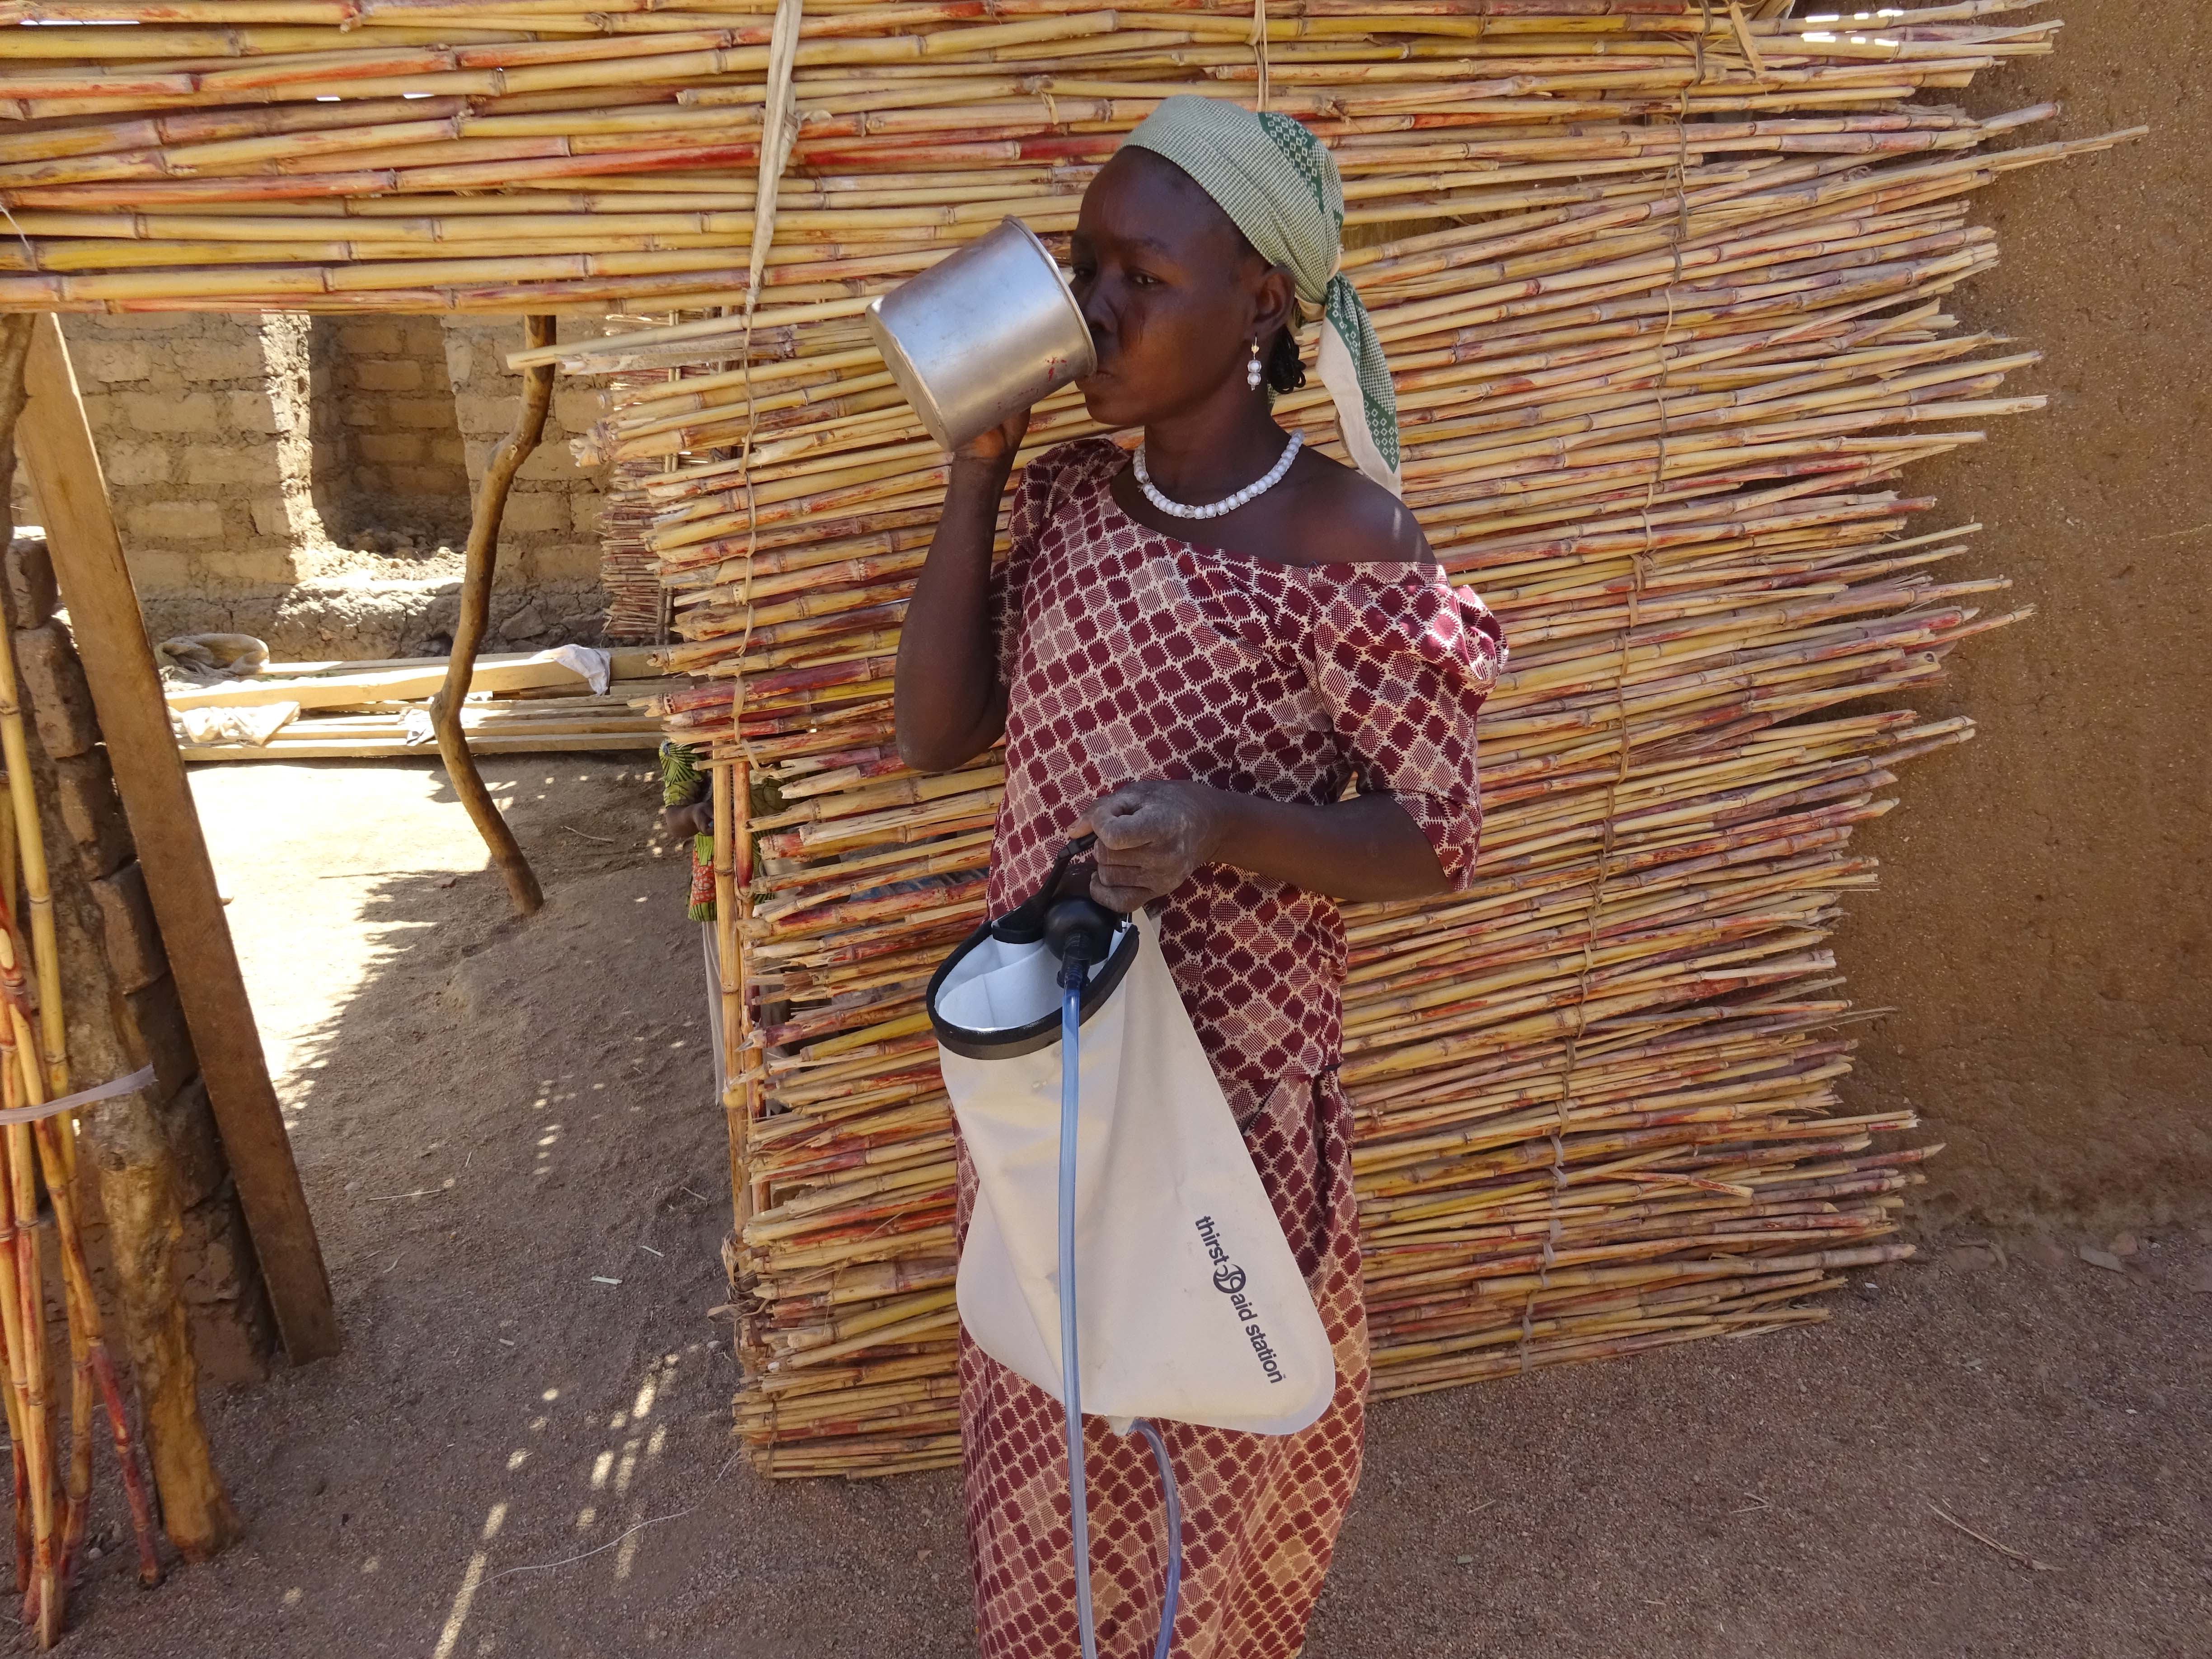 ShelterBox NZ provides water filters and carriers in Cameroon